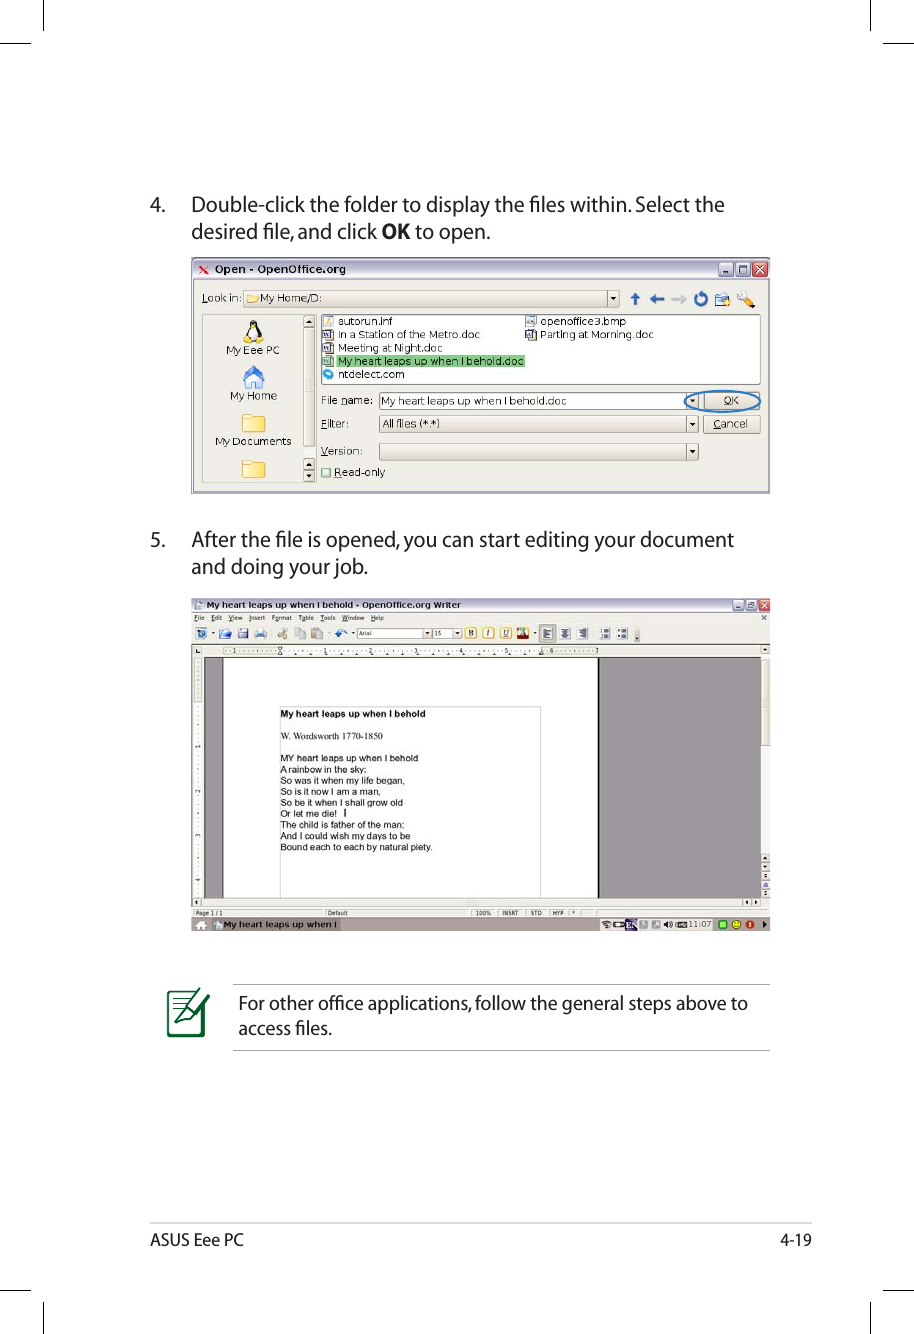 ASUS Eee PC4-194.  Double-click the folder to display the ﬁles within. Select the desired ﬁle, and click OK to open.5.  After the ﬁle is opened, you can start editing your document and doing your job.For other ofﬁce applications, follow the general steps above to access ﬁles. 